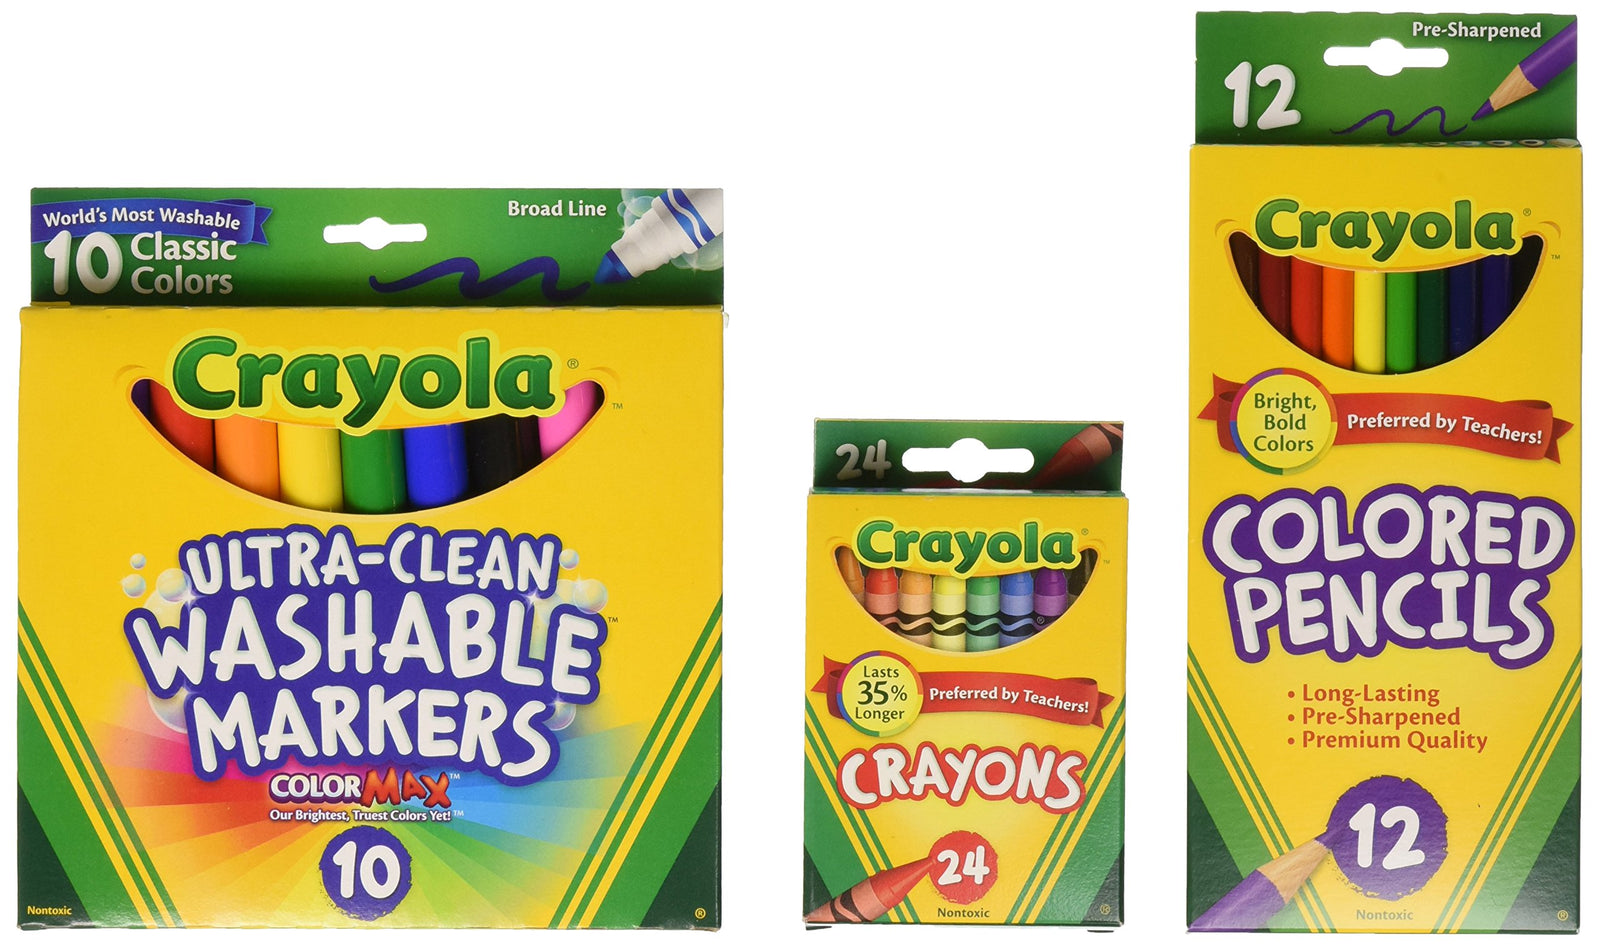 Crayola Back To School Supplies, Grades 3-5, Ages 7, 8, 9, 10, Contains 24 Crayola Crayons, 10 Washable Broad Line Markers, and 12 Colored Pencils